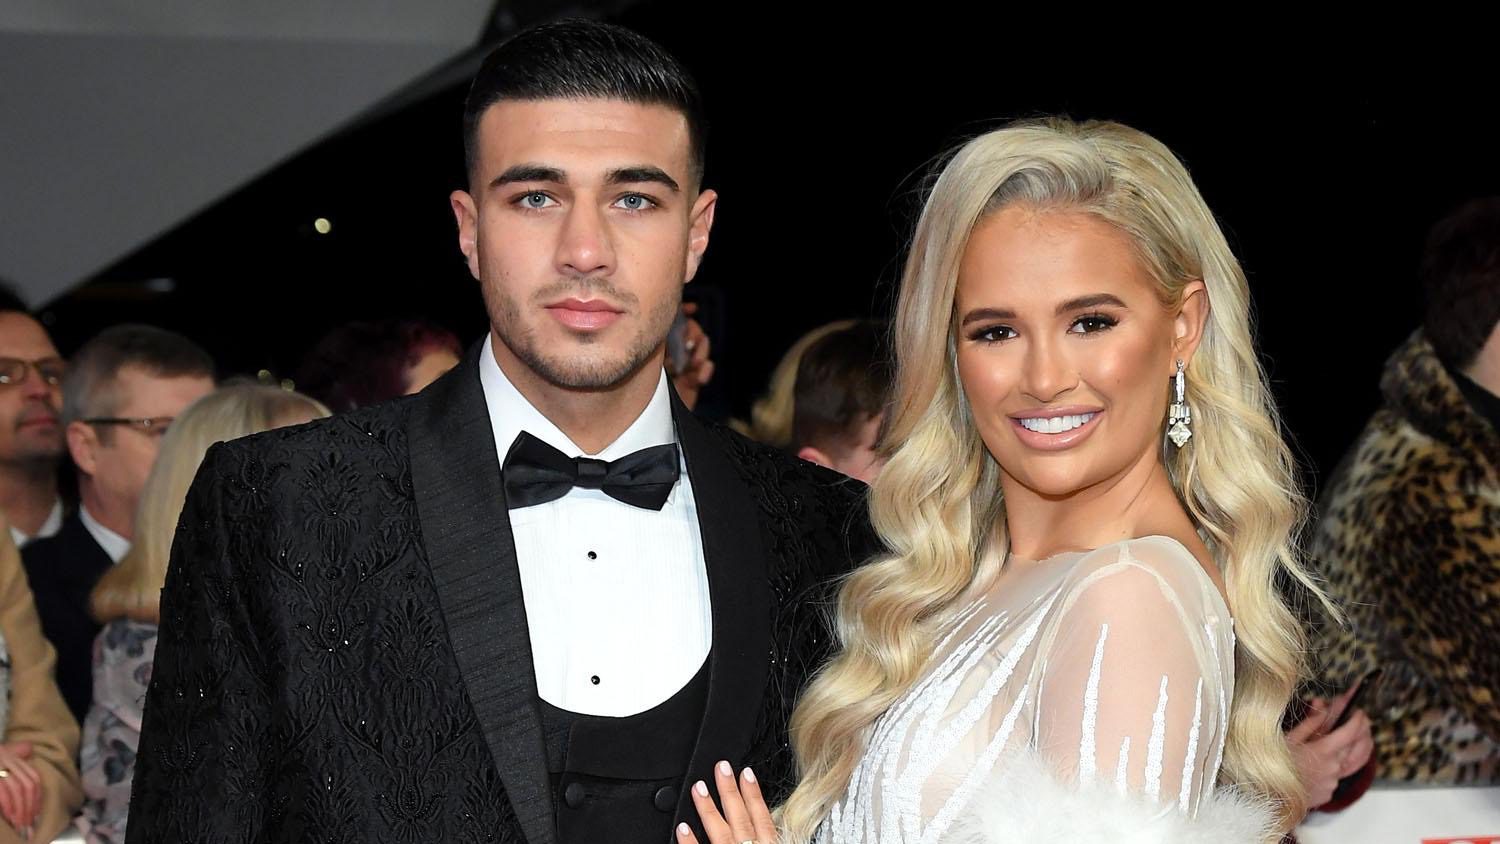 Molly Mae and Tommy Fury Break Up